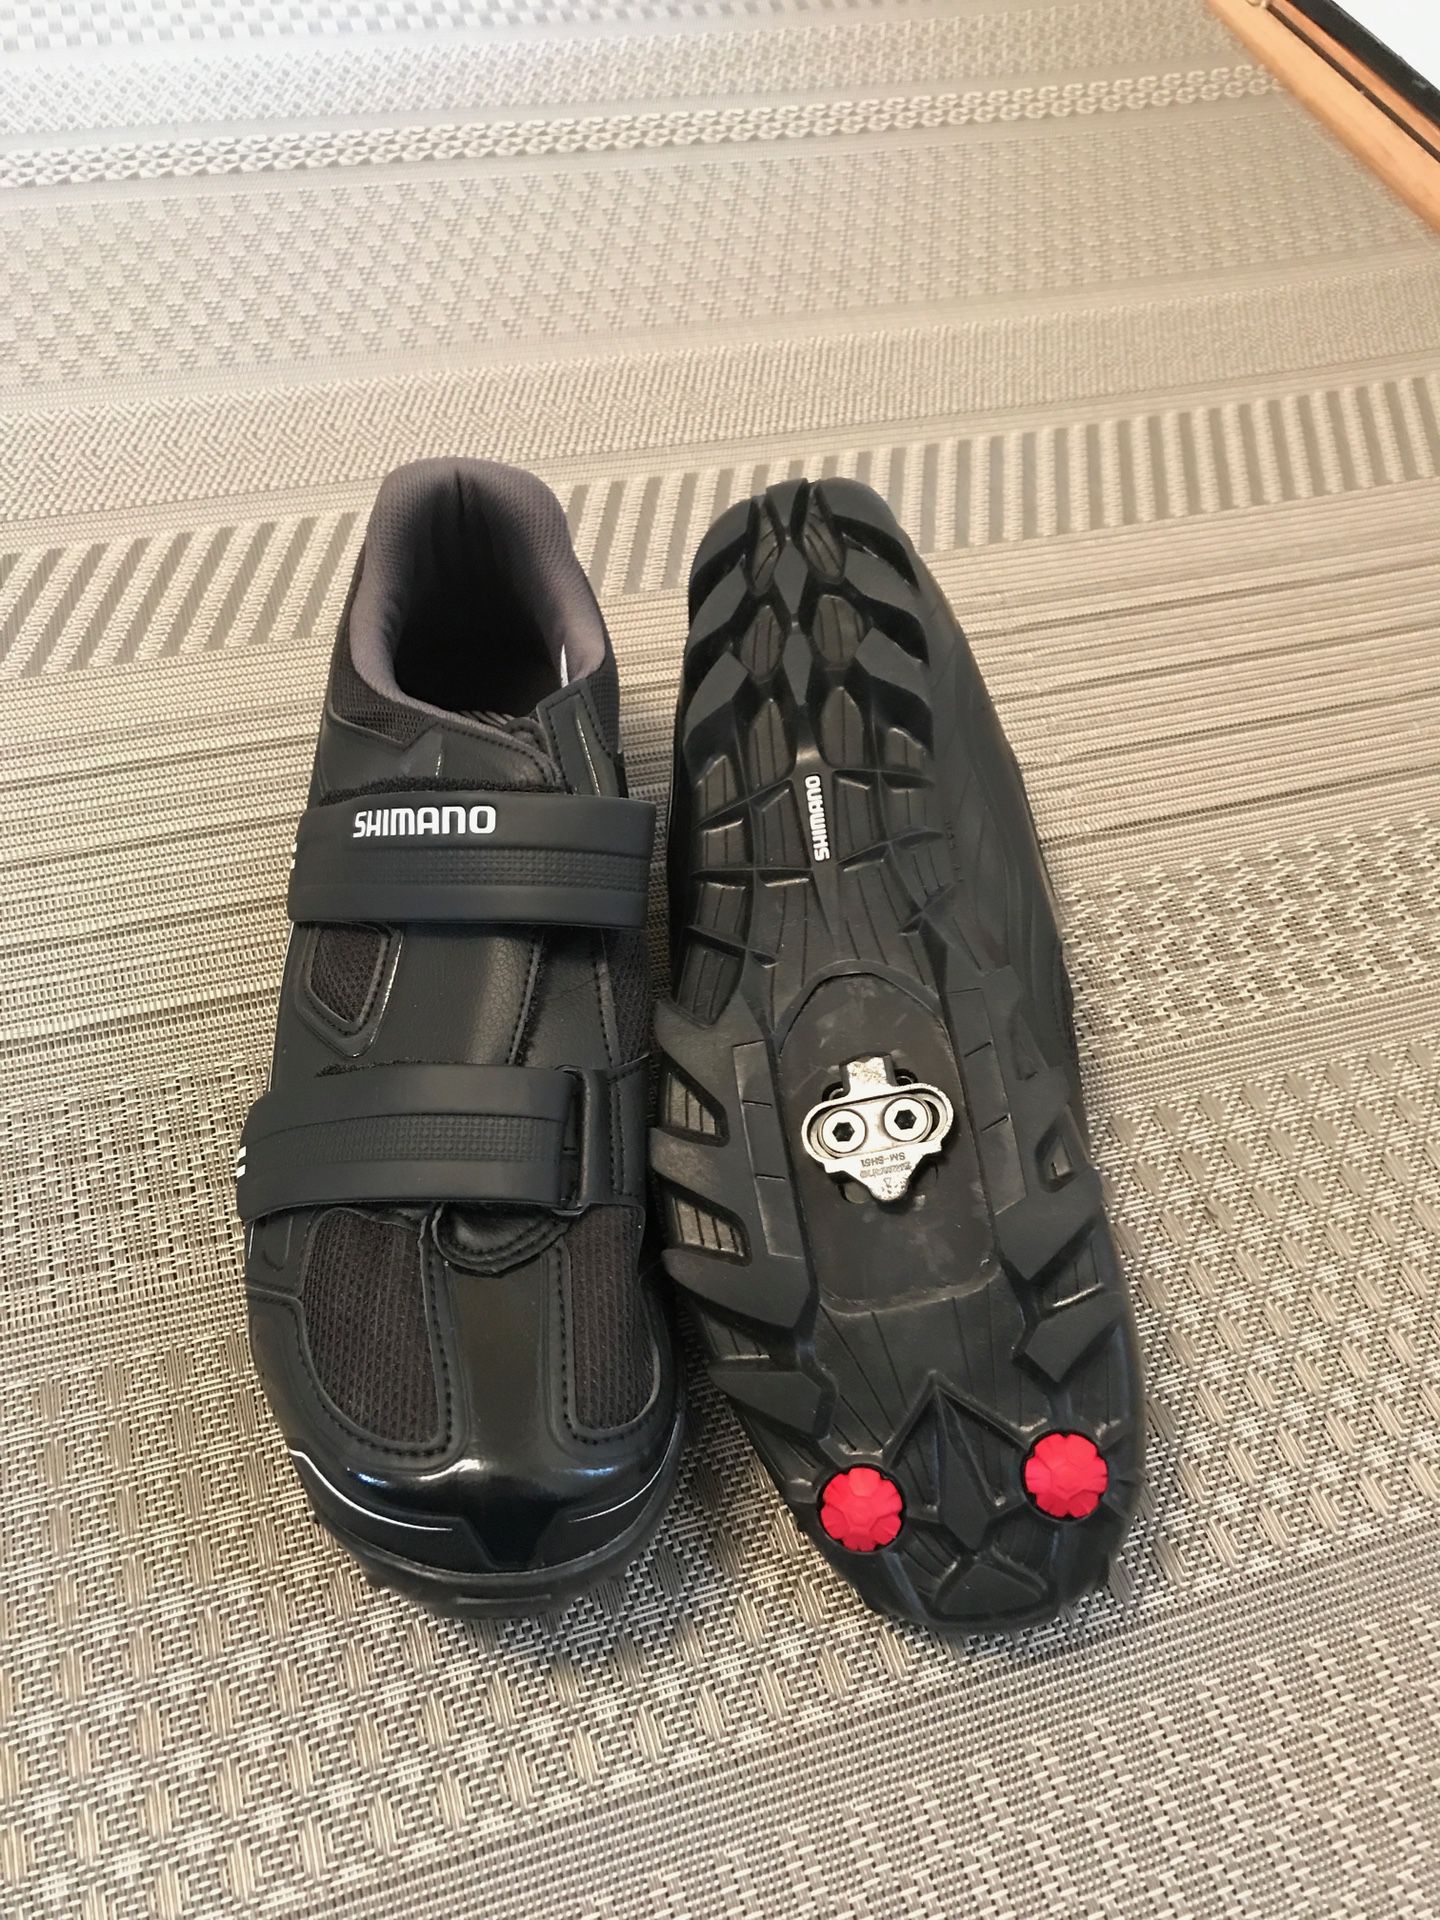 Worn once Shimano bike spin shoes men size 10.5